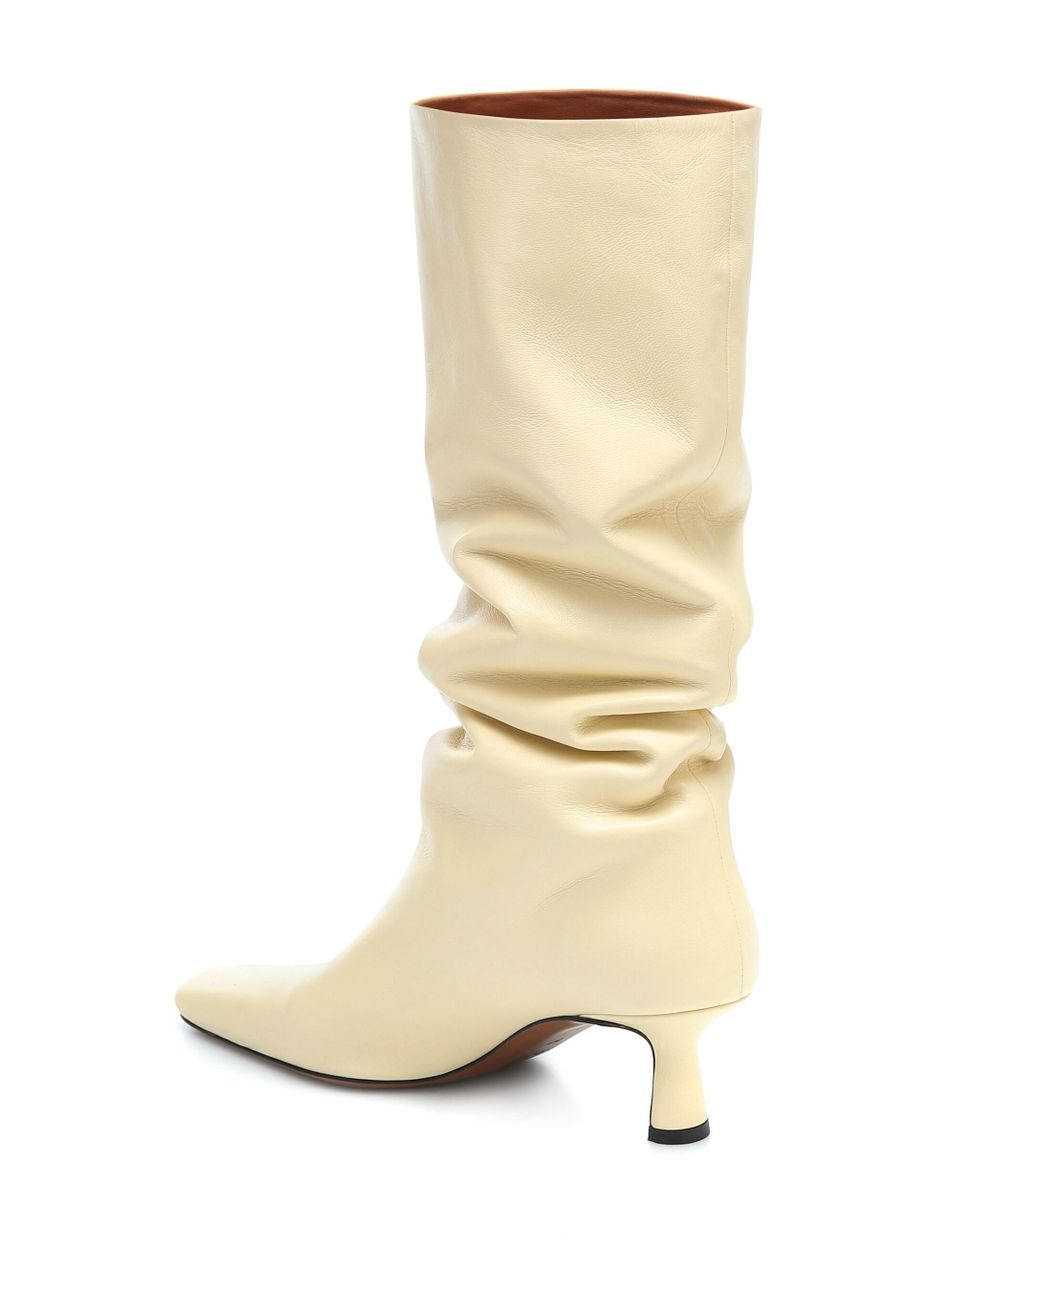 Neous Cynis Knee-high Leather Boots in Yellow (Natural) - Lyst